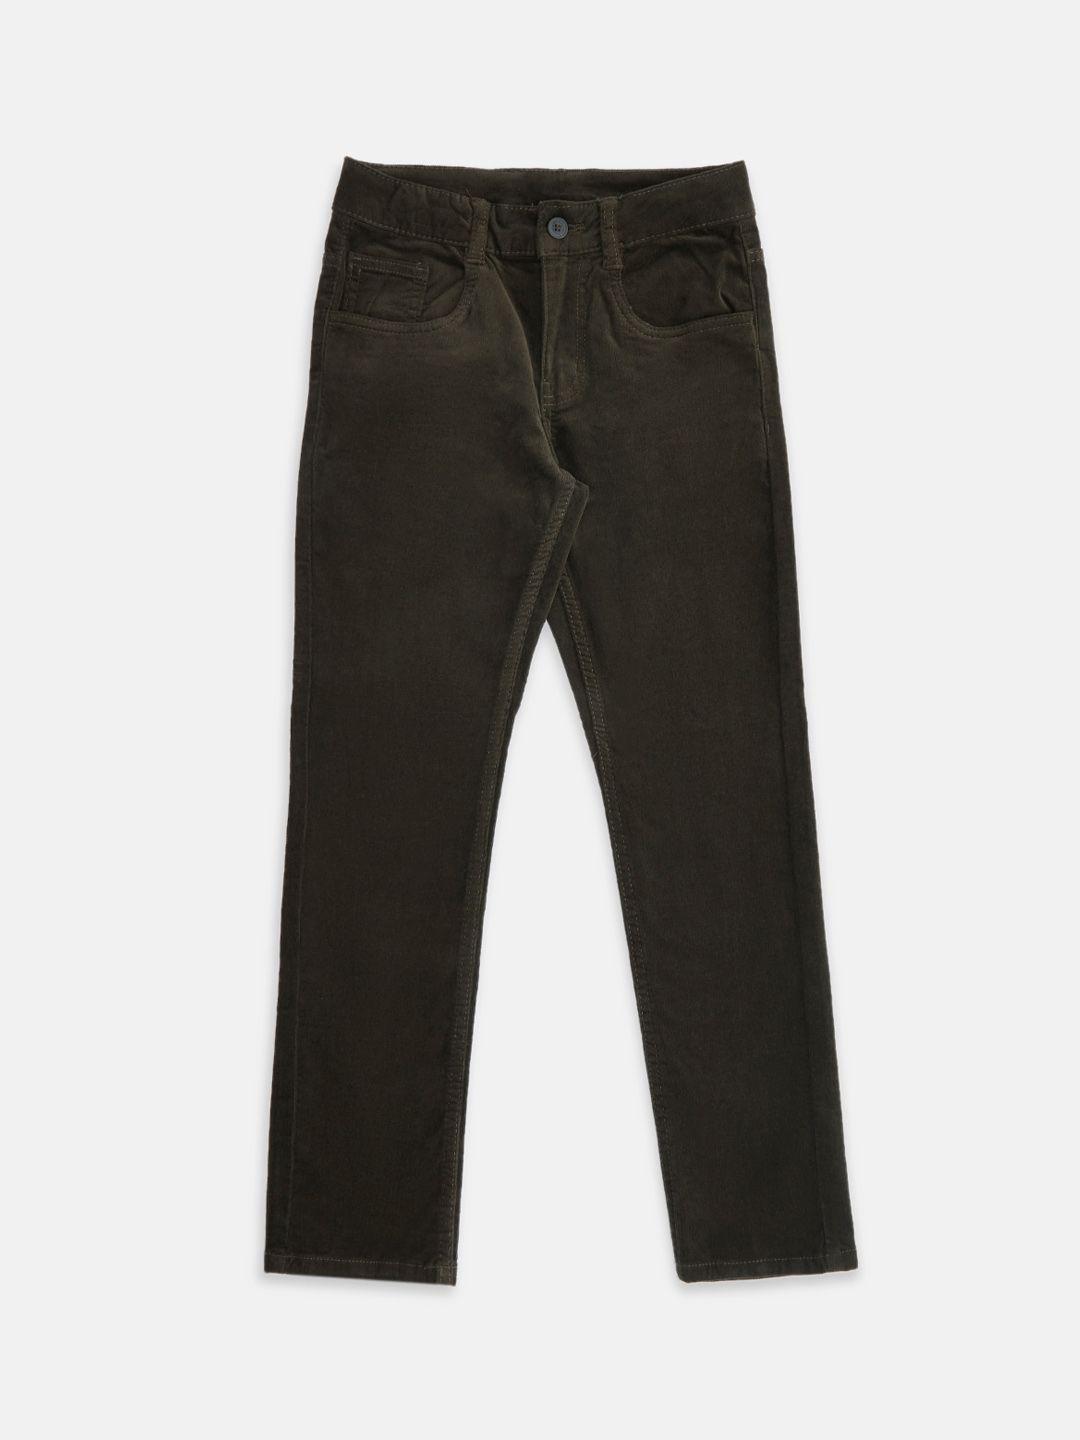 pantaloons junior boys olive green relaxed fit jeans